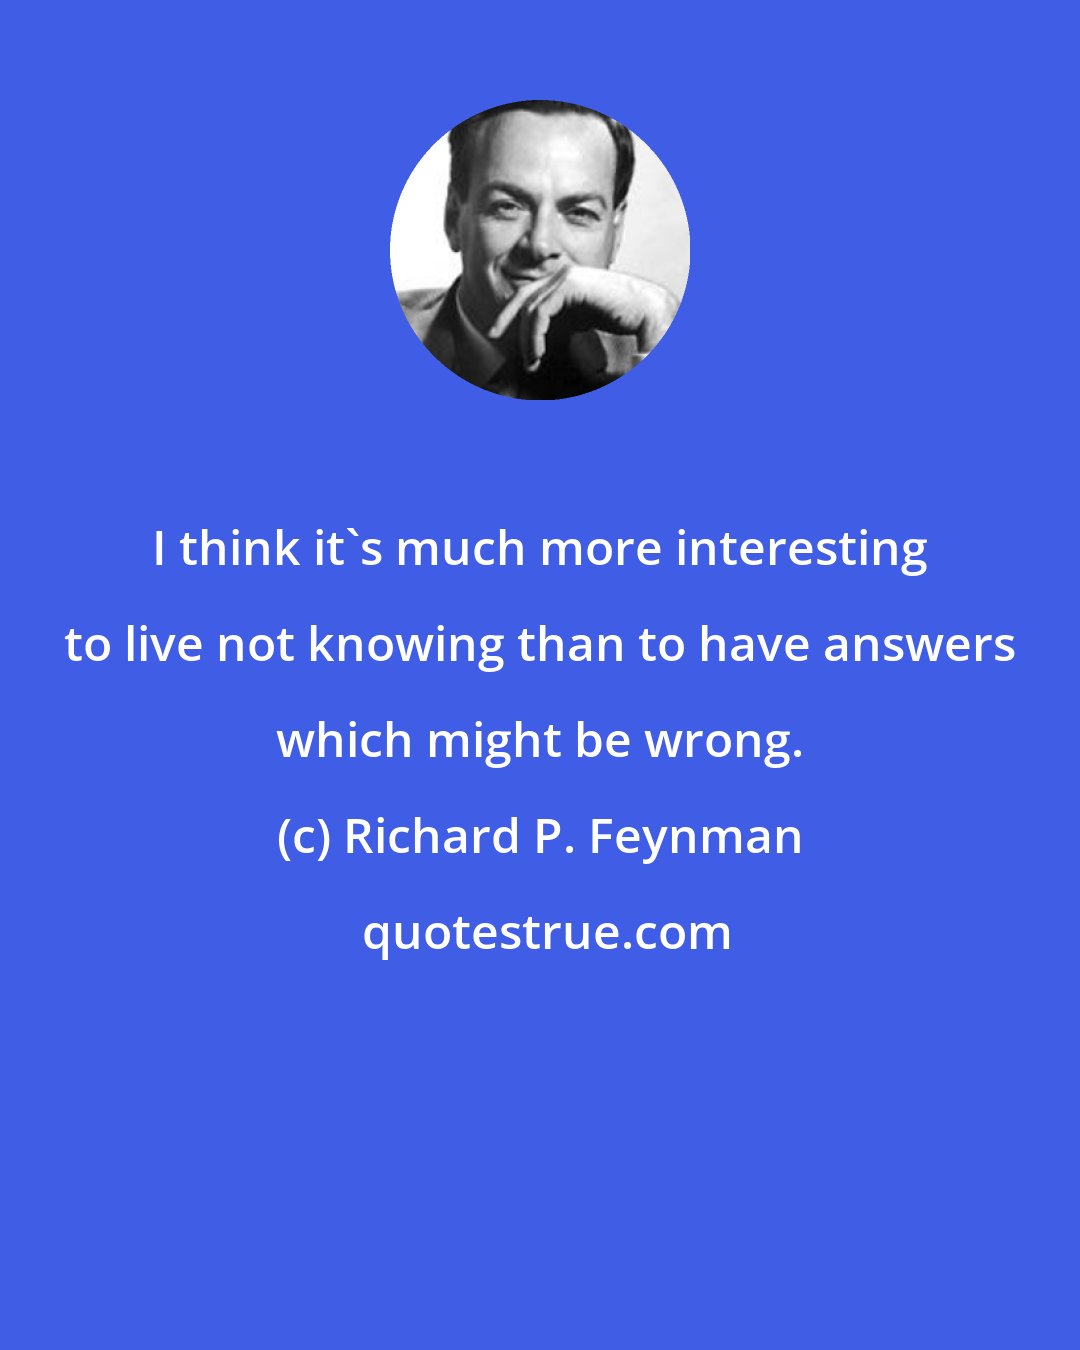 Richard P. Feynman: I think it's much more interesting to live not knowing than to have answers which might be wrong.